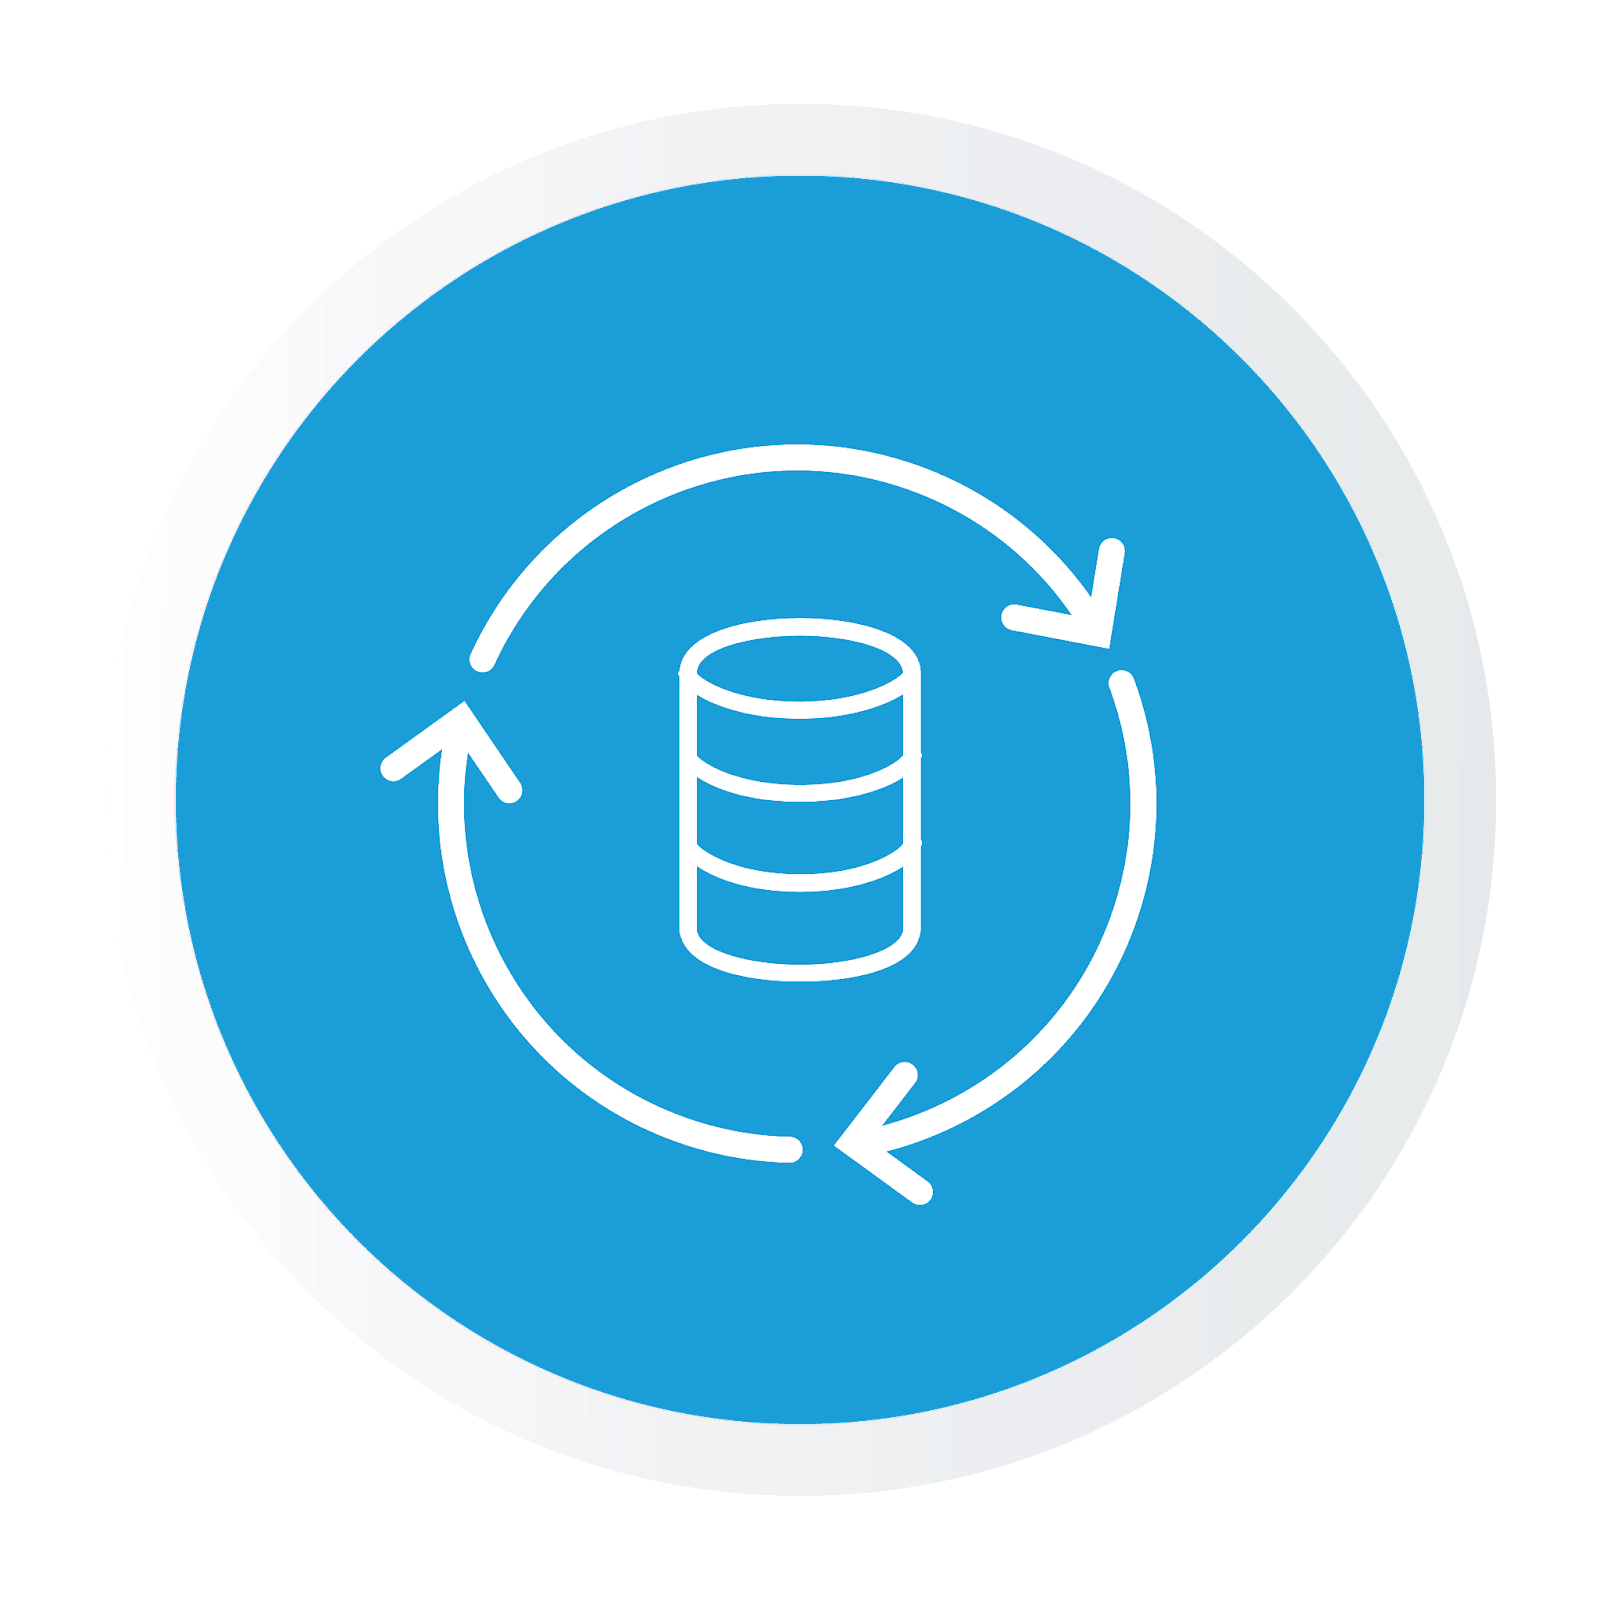 An icon of a data stack and arrows representing data freshness.